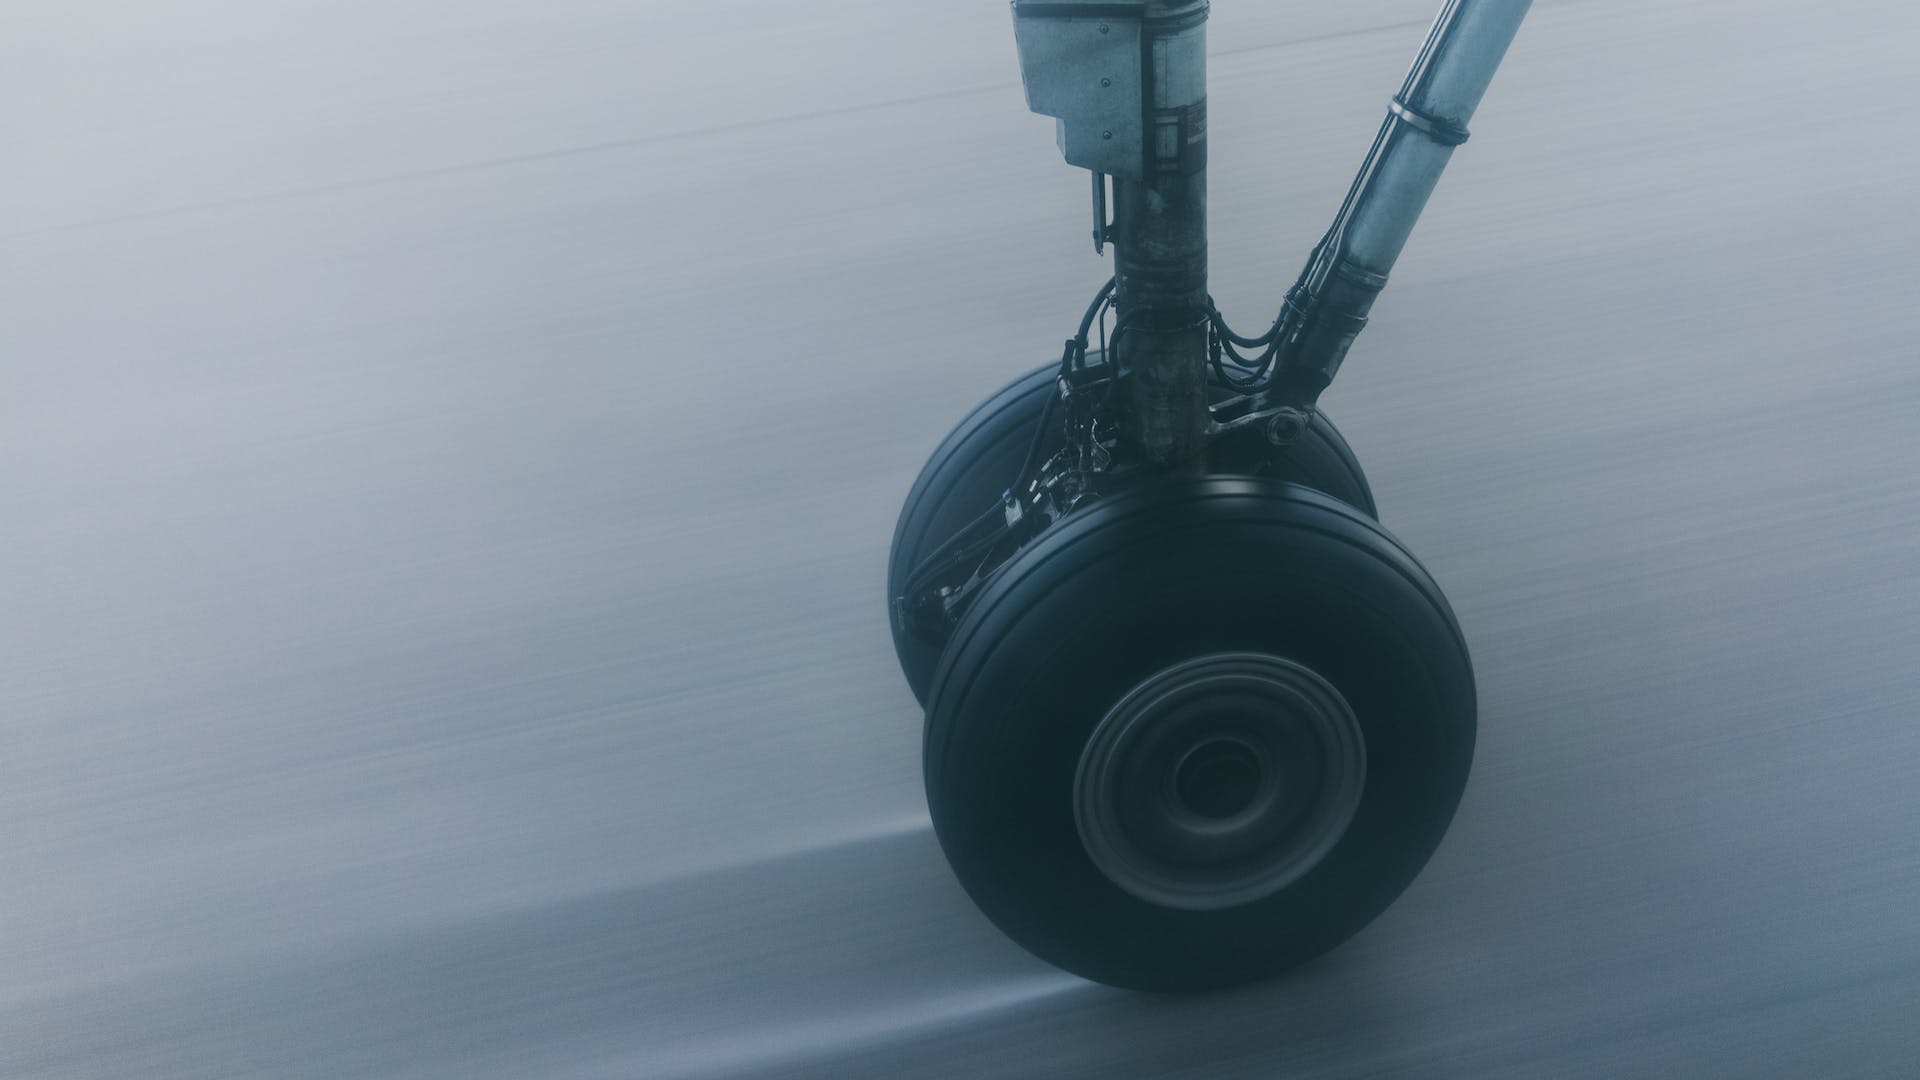 An airplane wheel touching the ground | Source: Pexels